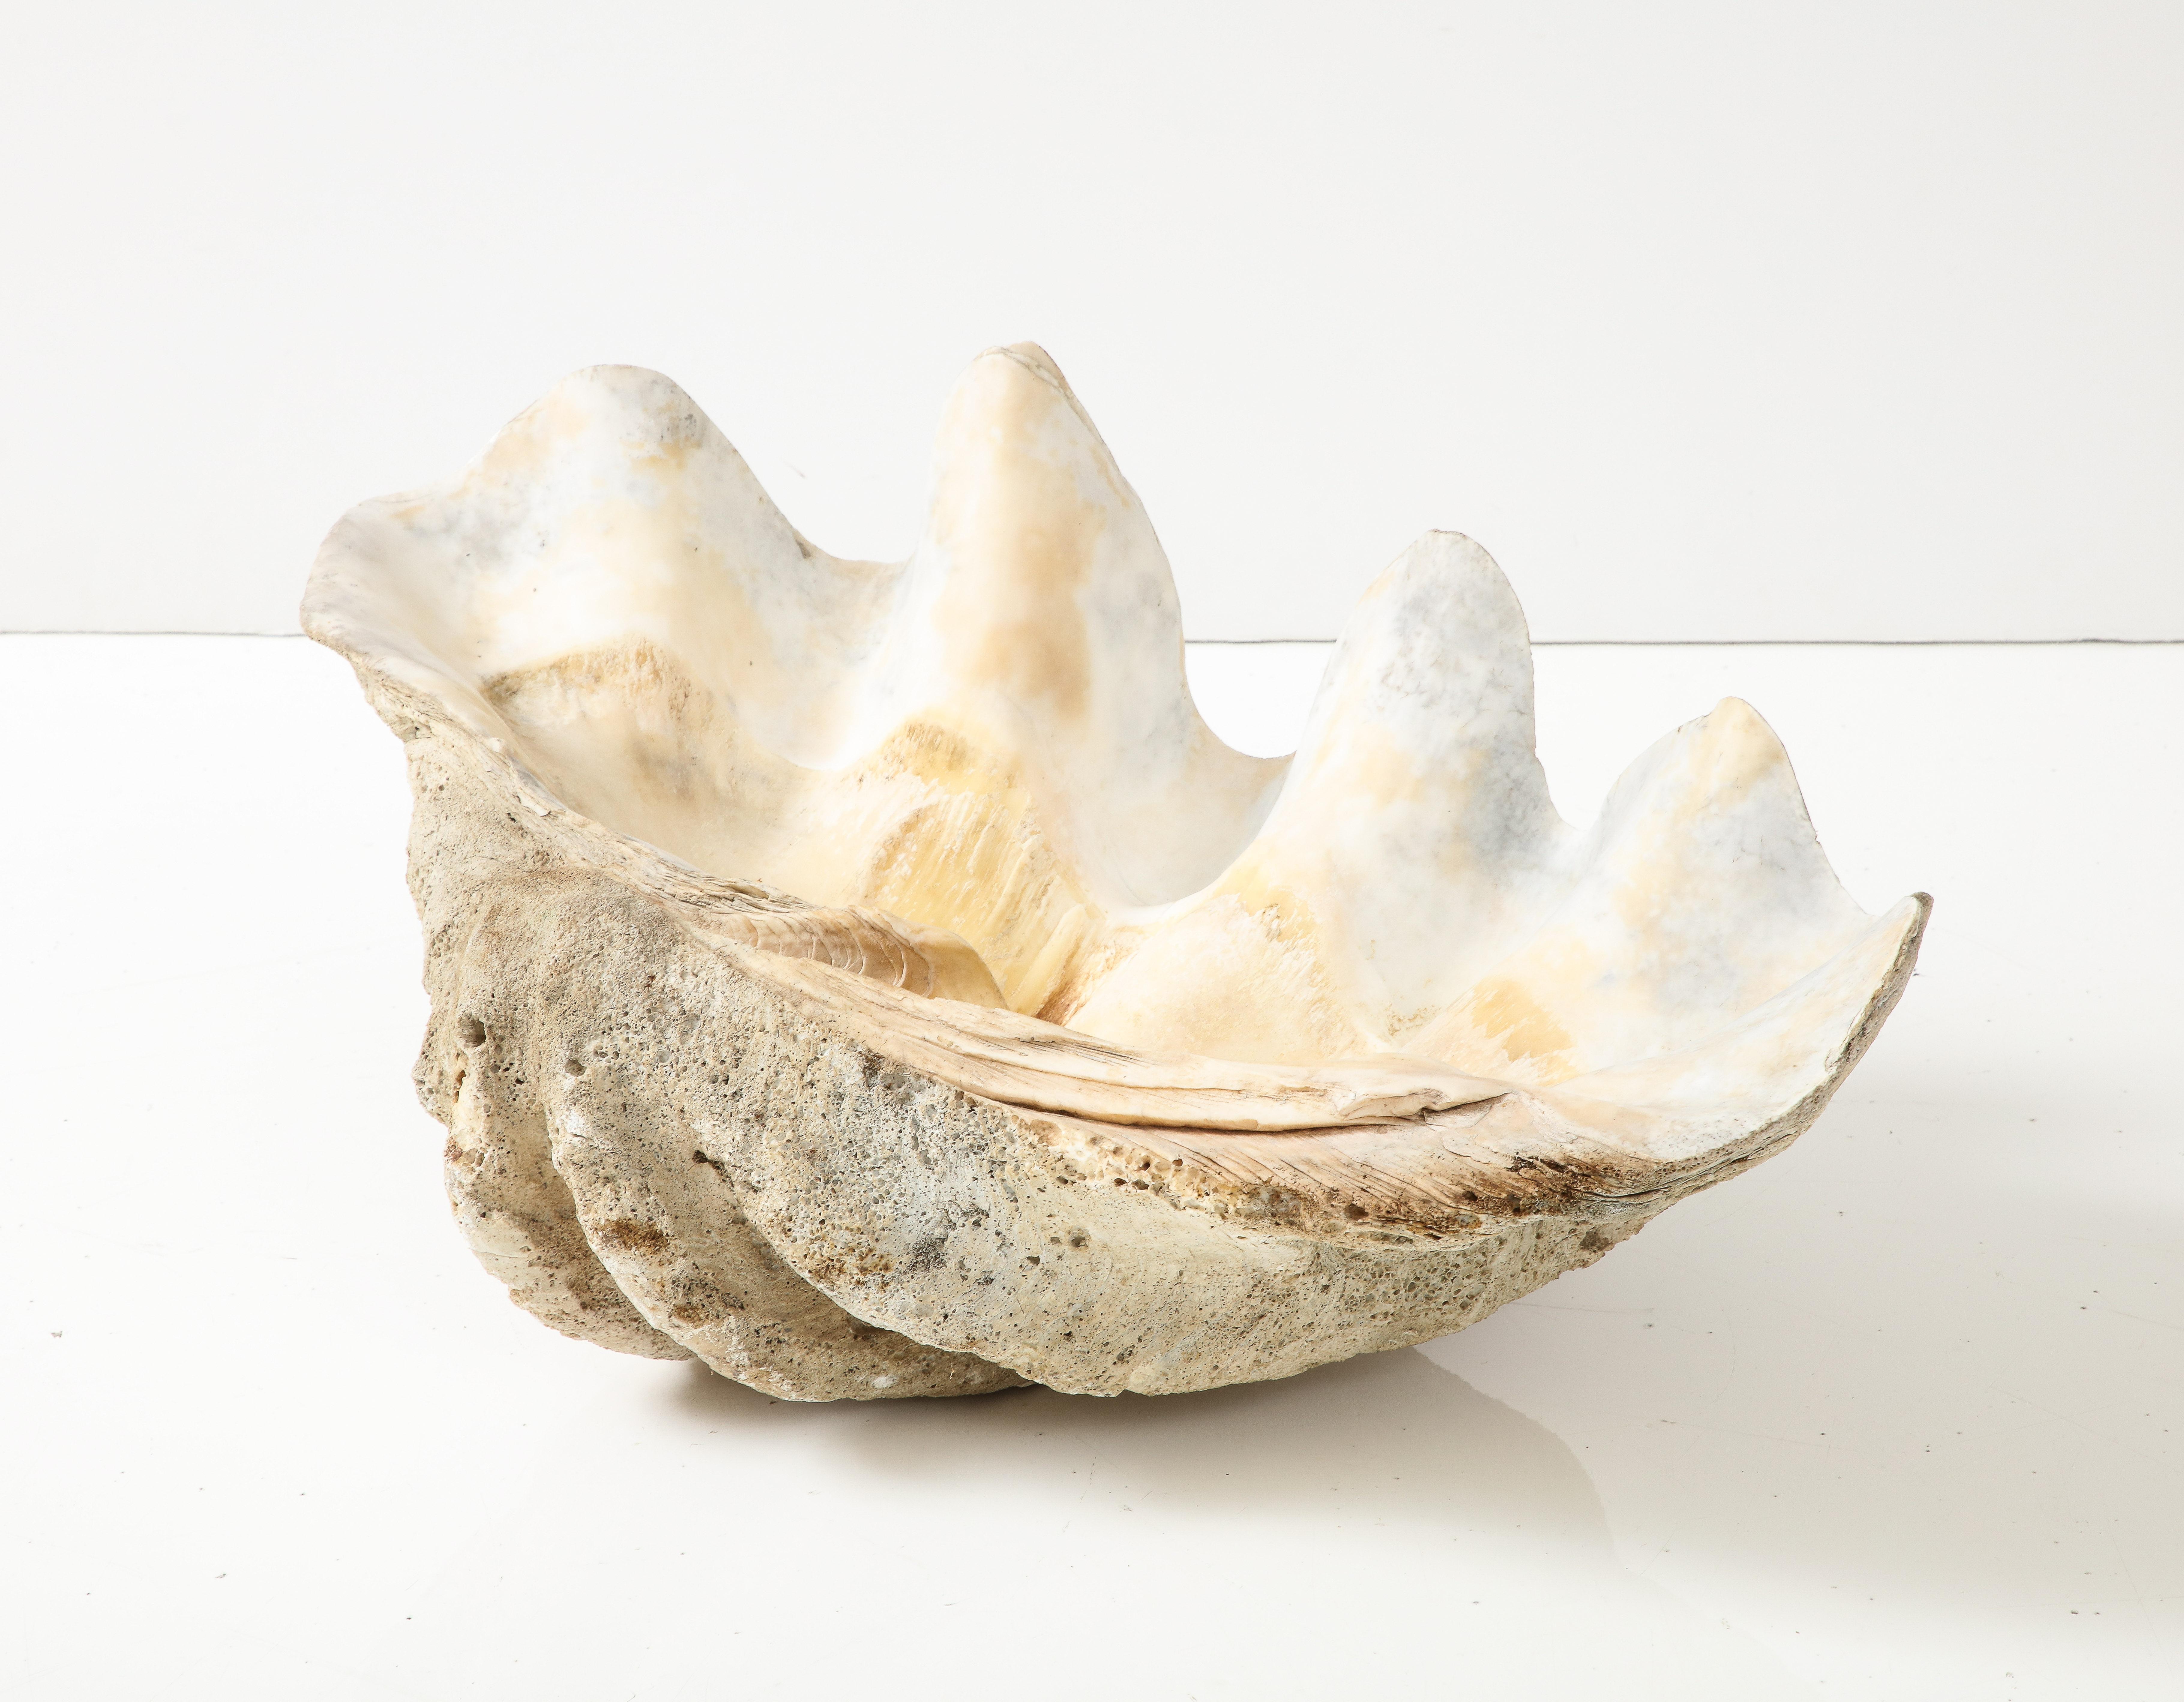 Coquillage Exceptionnel grand coquillage ancien « Tridacna Gigas » « Giant Clam », océan Pacifique